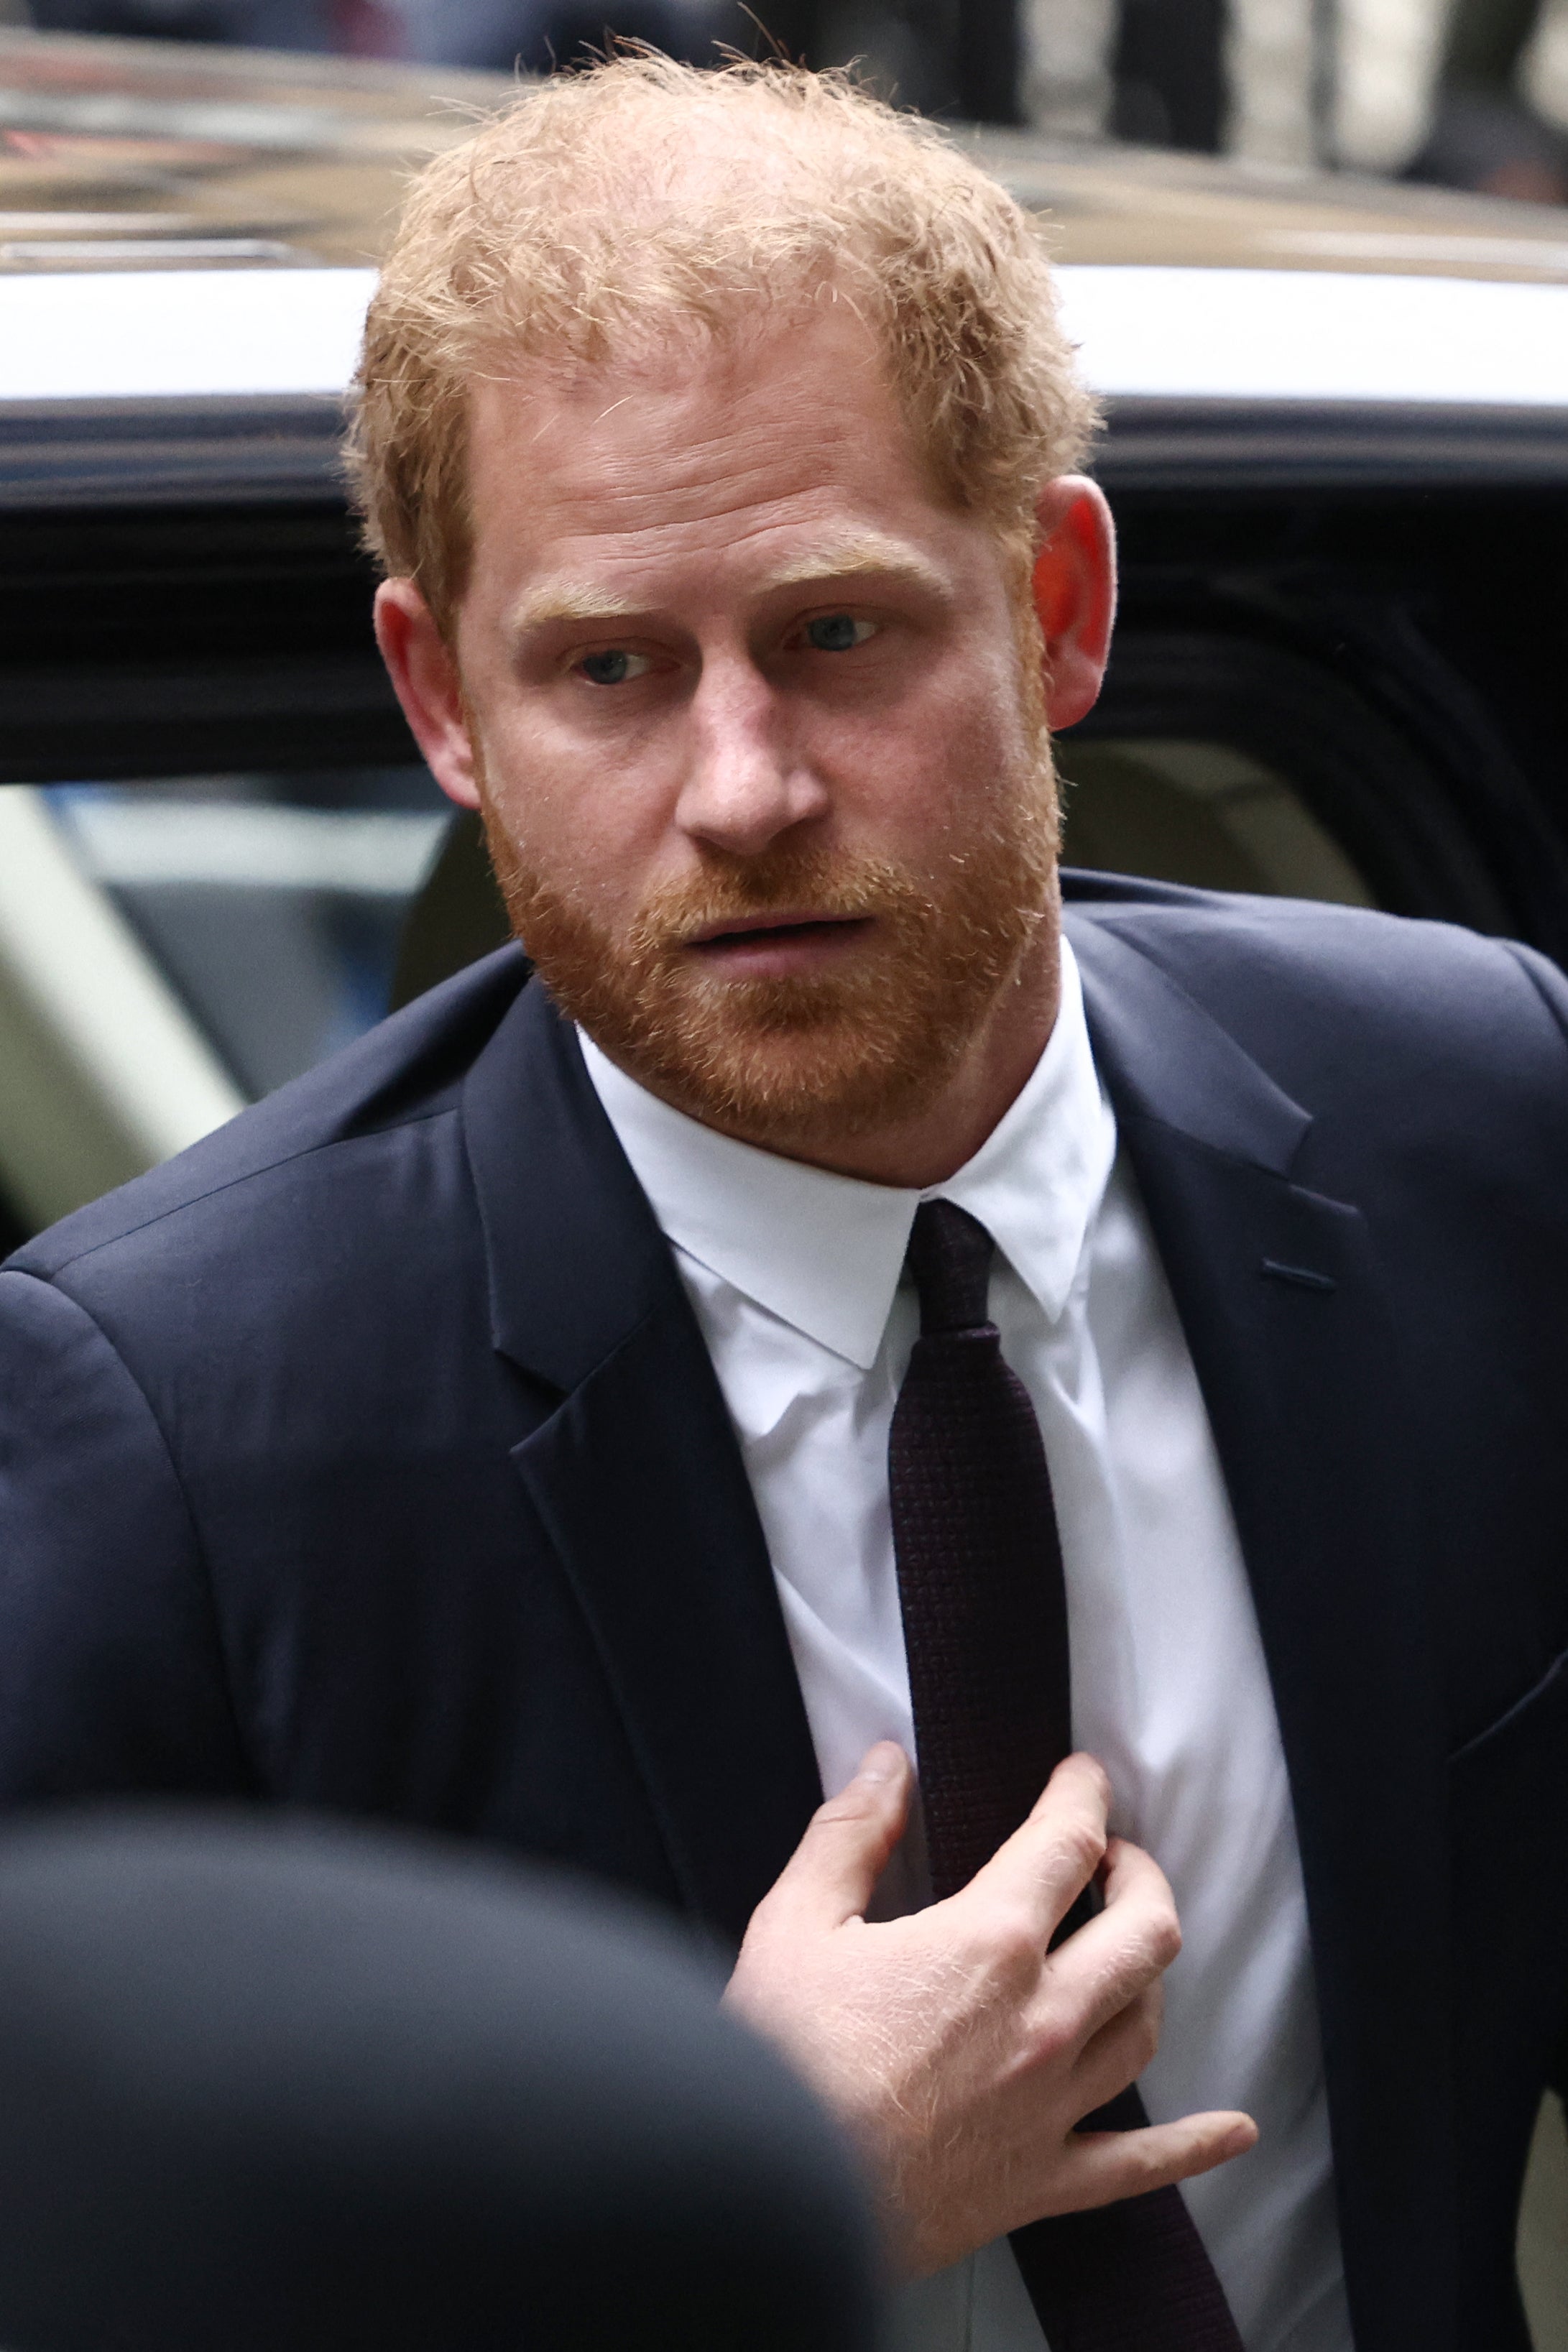 The Duke of Sussex has won damages of £140,600 against Mirror Group Newspapers (MGN) at the High Court on Friday